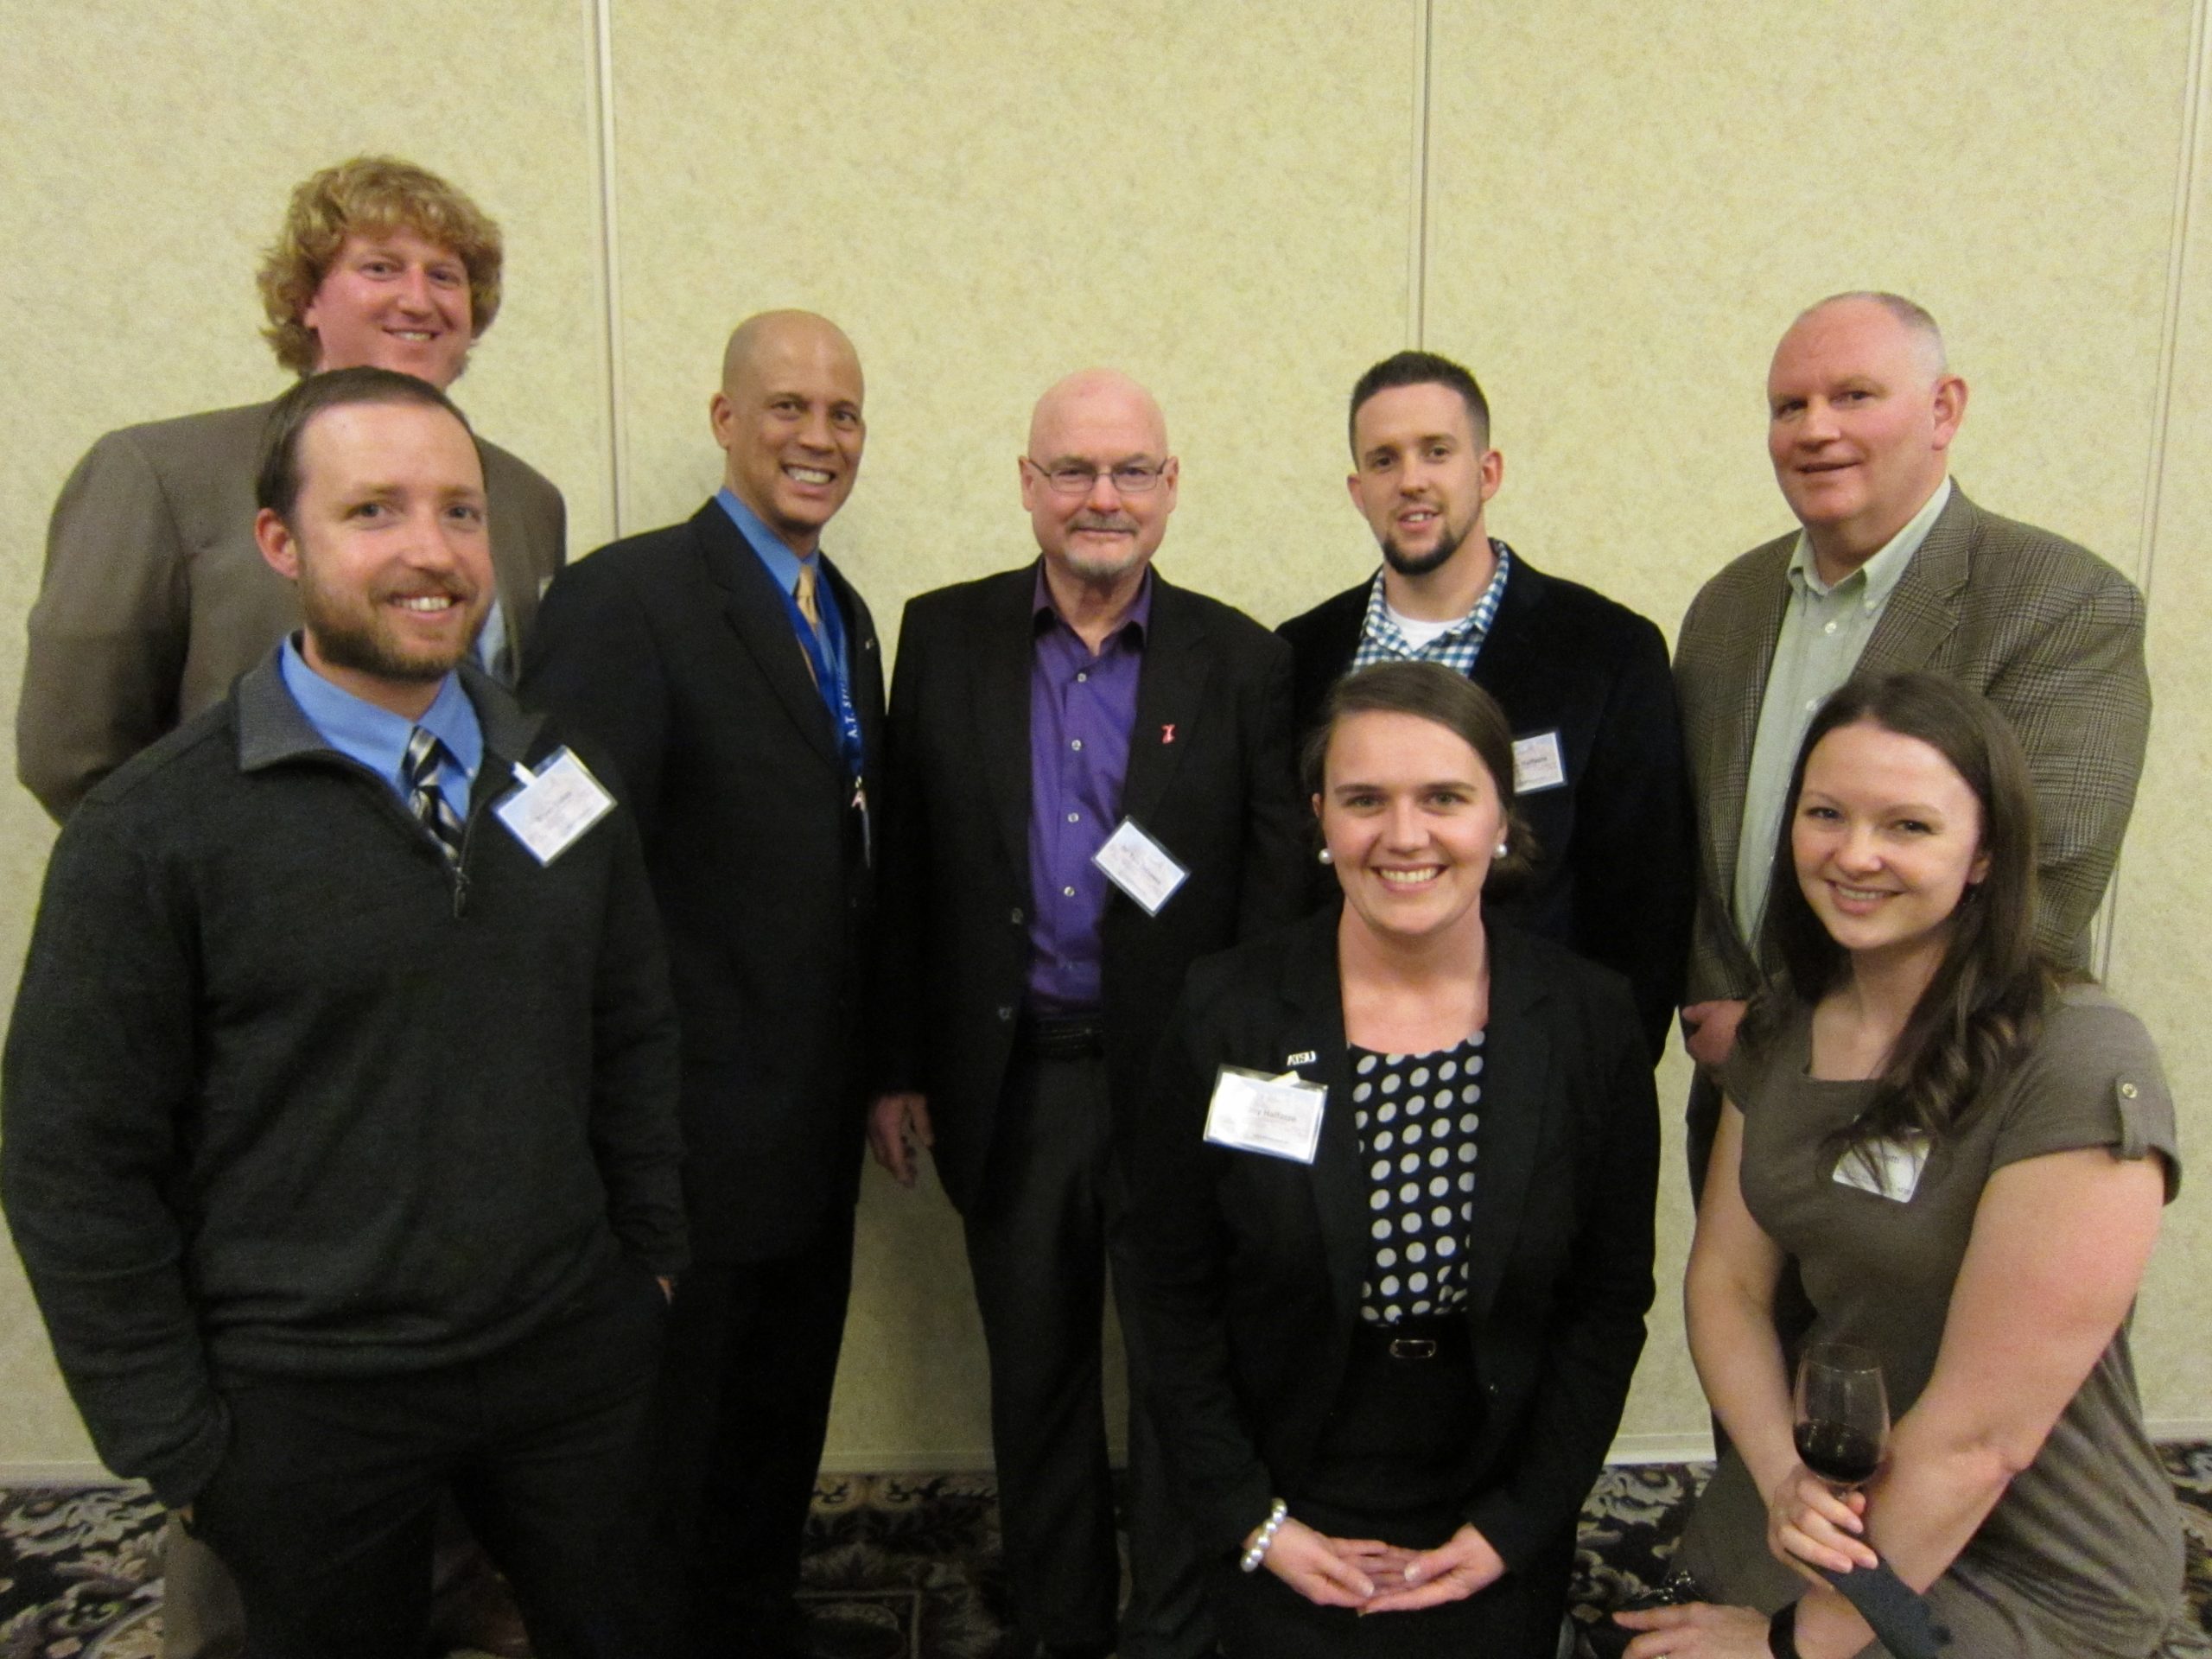 DHSc Alumni at their Winter Institute meeting on February 20